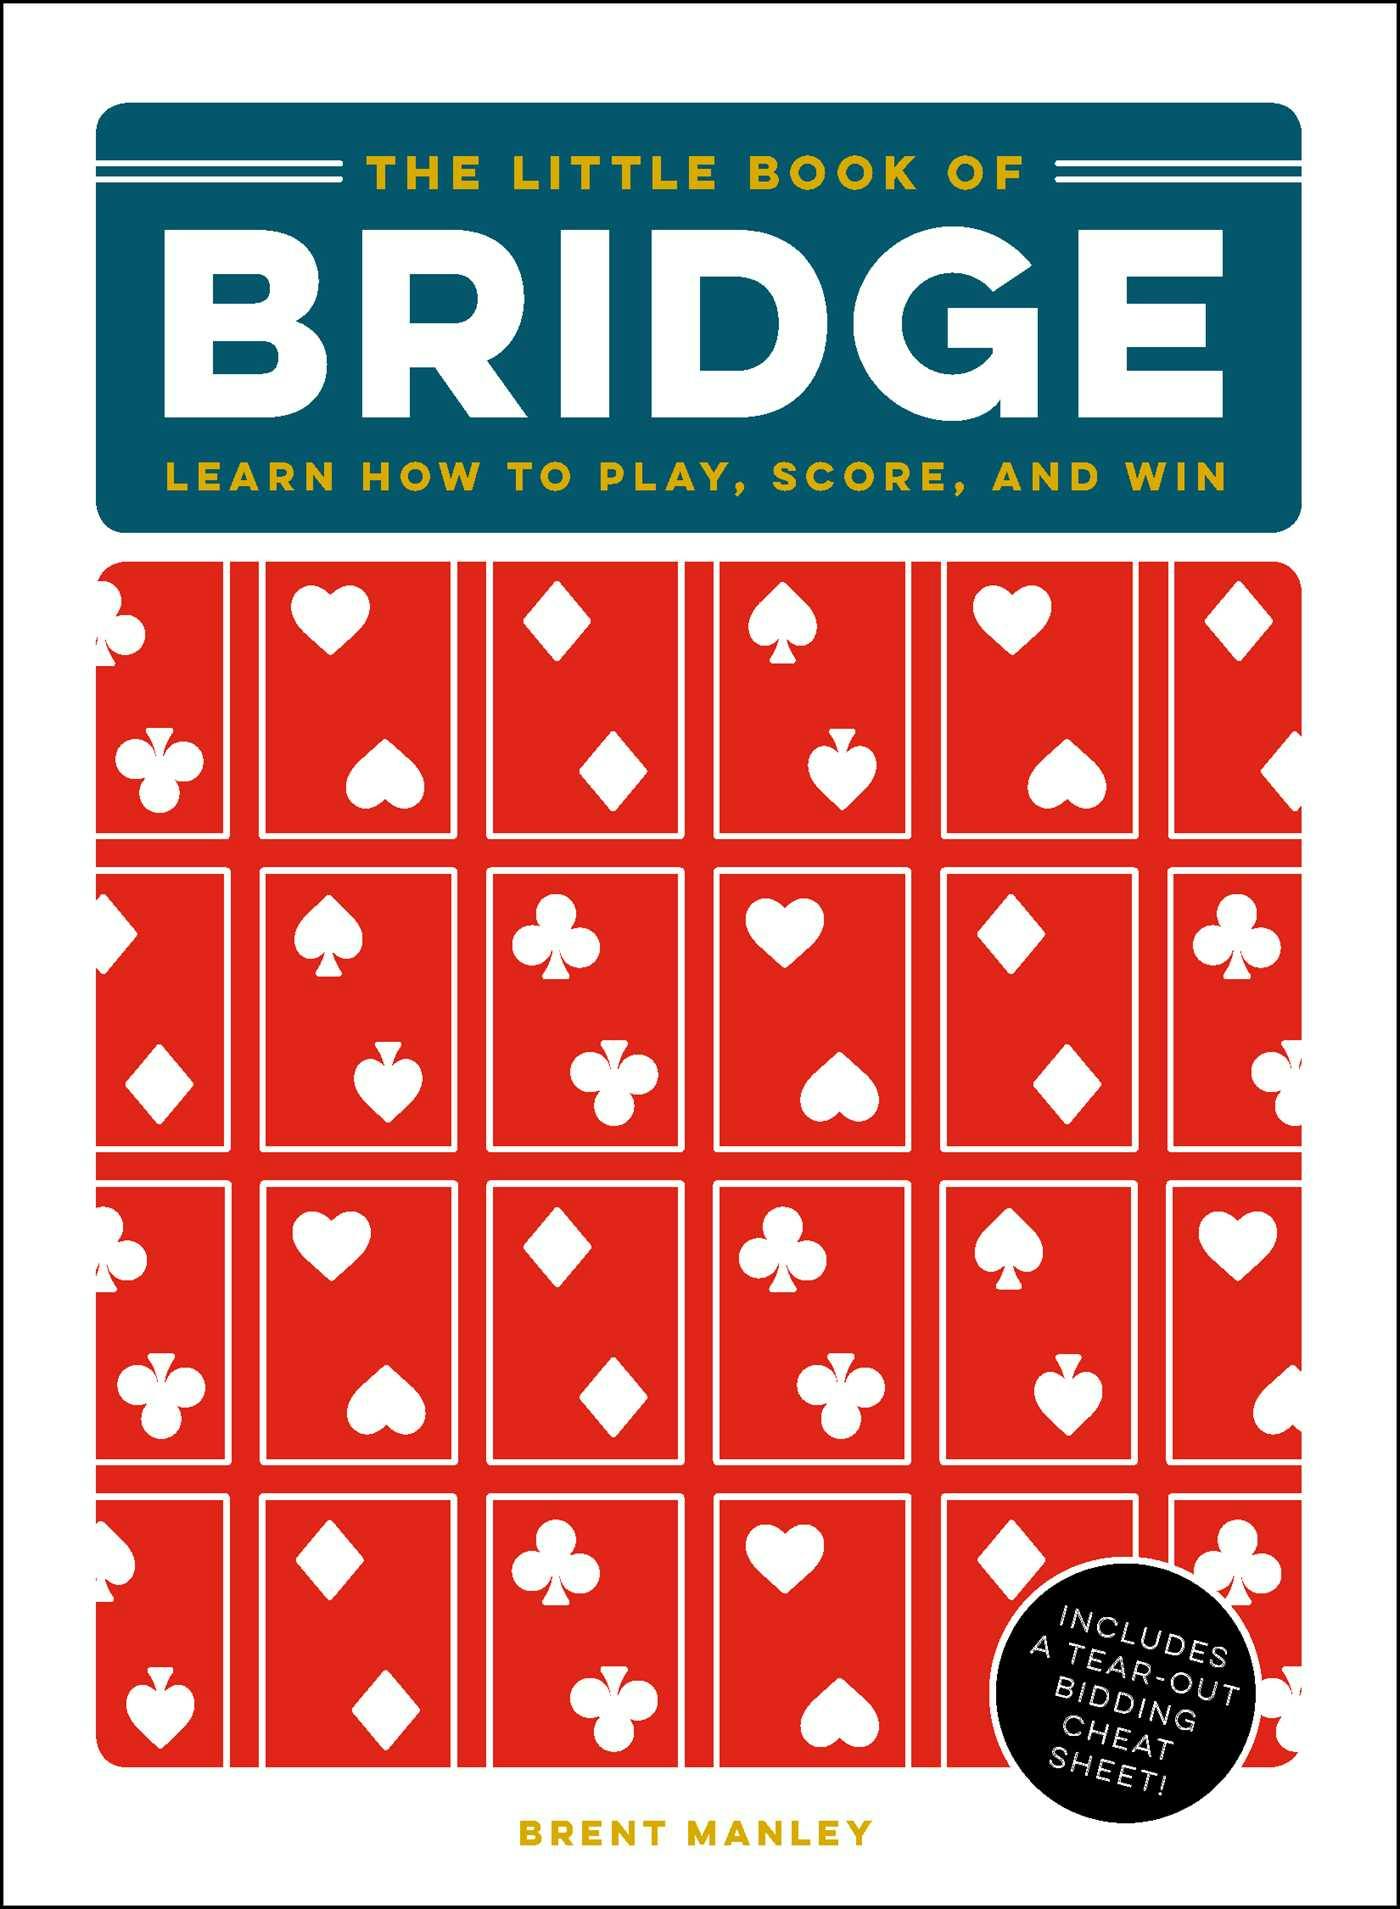 The Little Book of Bridge: Learn How to Play, Score, and Win - Brent Manley